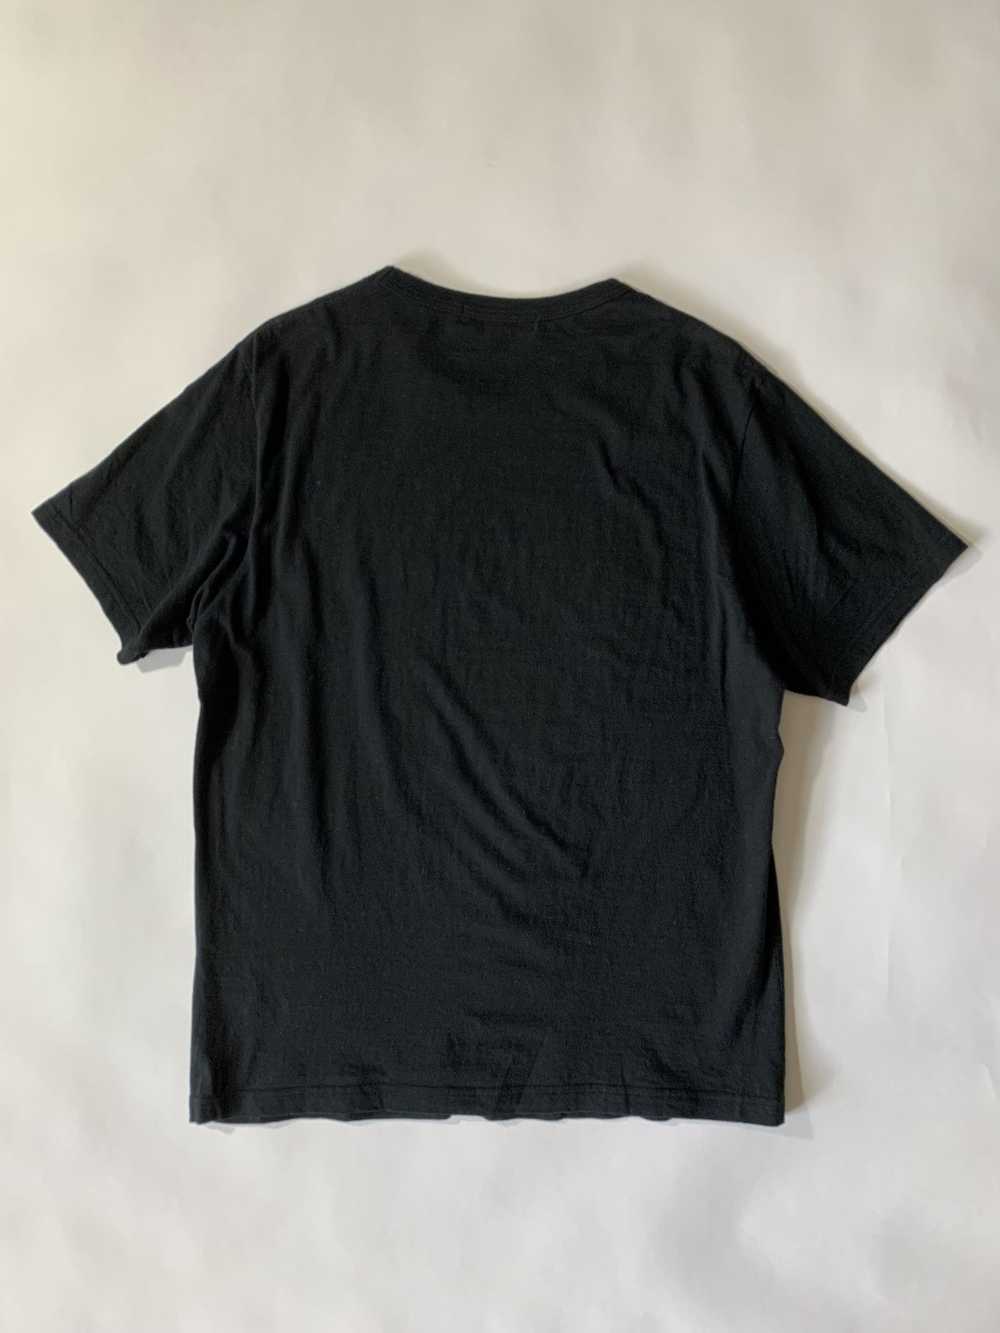 Undercover SS09 Neoboy Patti Smith Poem Tee - image 2